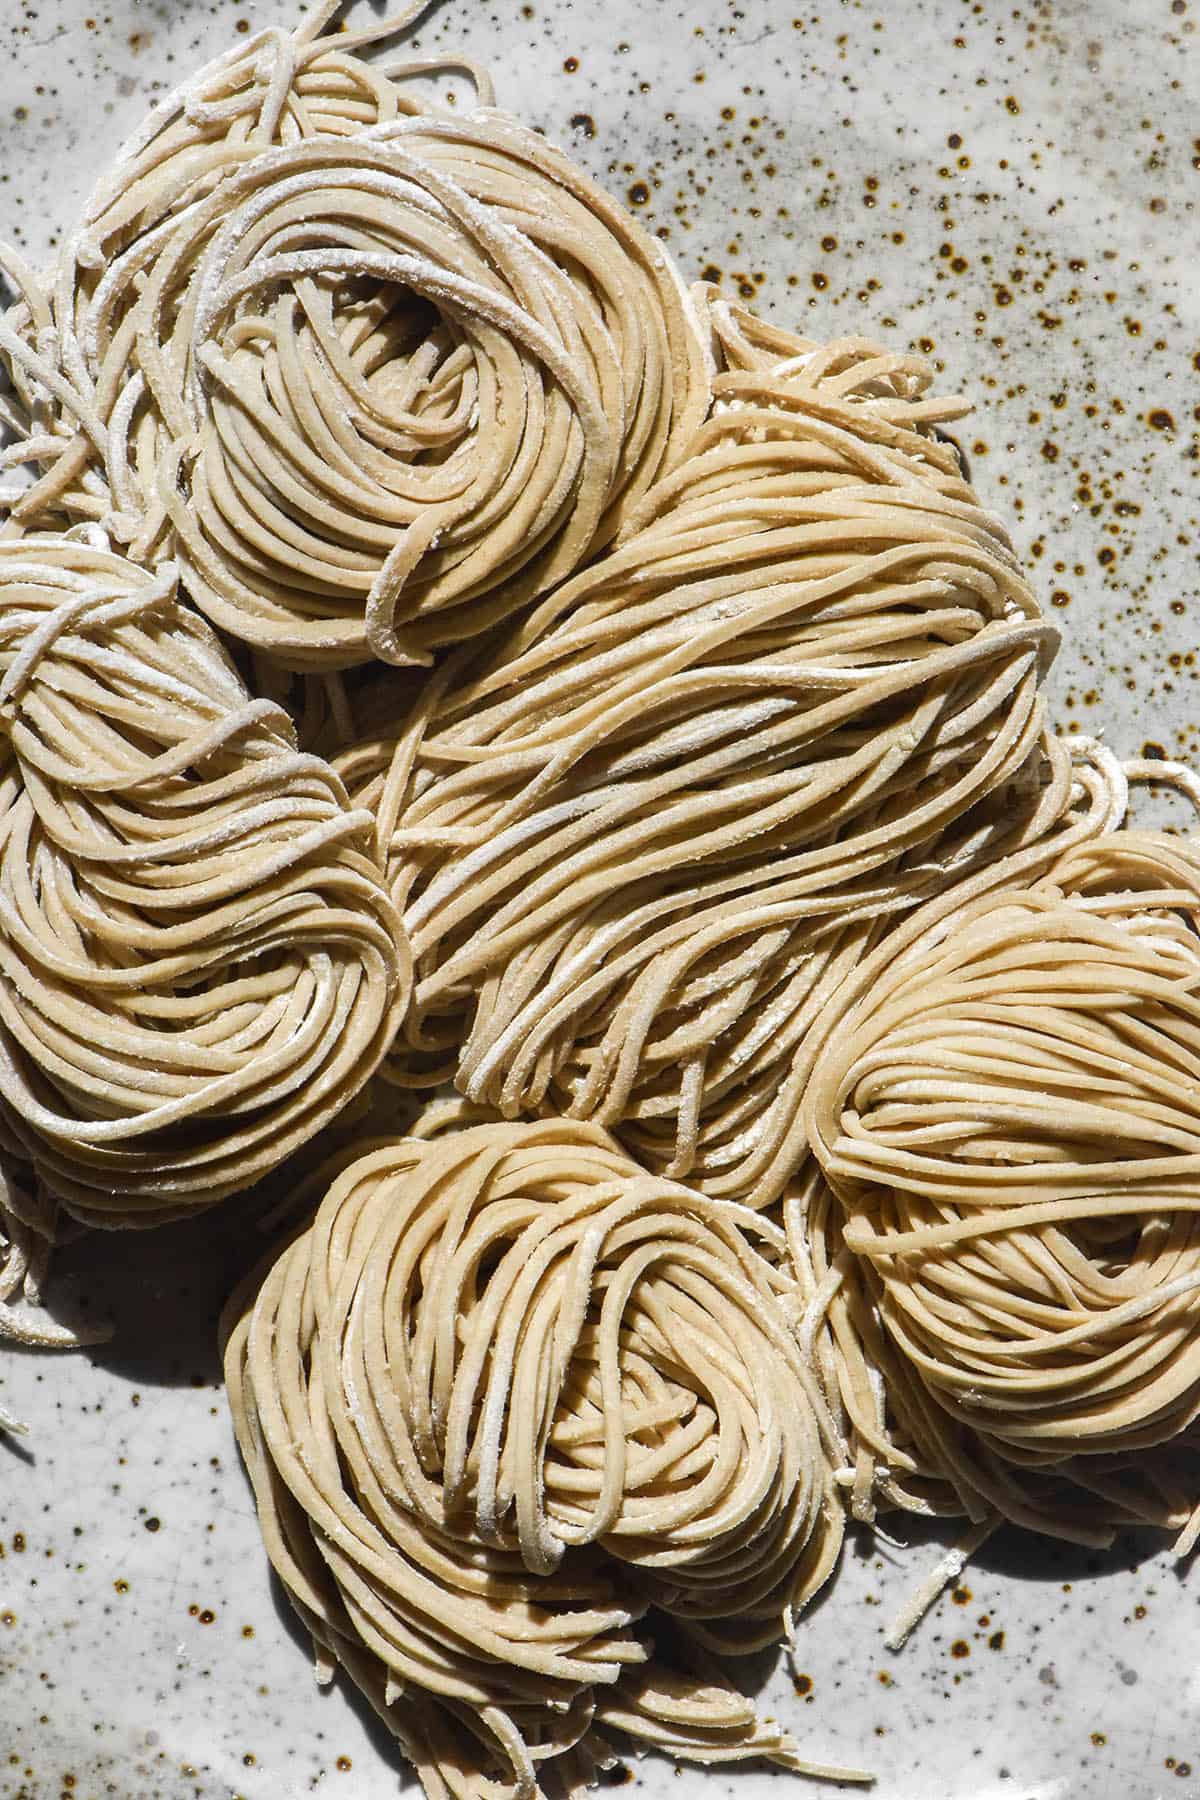 An aerial close up image of gluten free buckwheat soba noodles arranged in nests on a white speckled ceramic plate